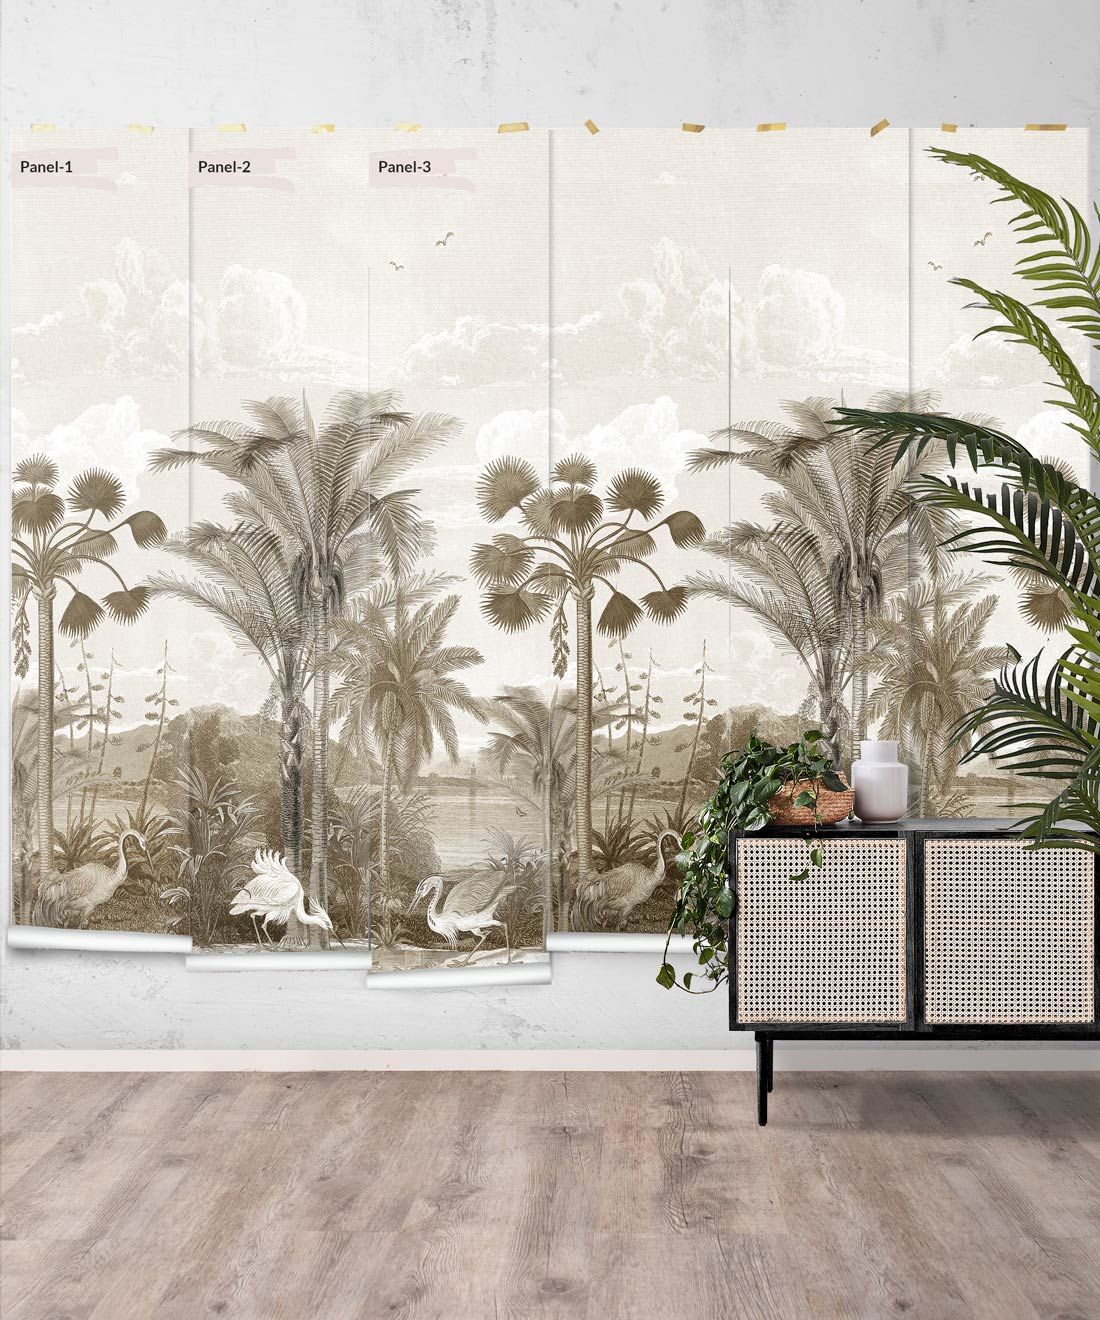 South Asian Subcontinent Wallpaper Mural •Bethany Linz • Palm Tree Mural • Sepia • Panels